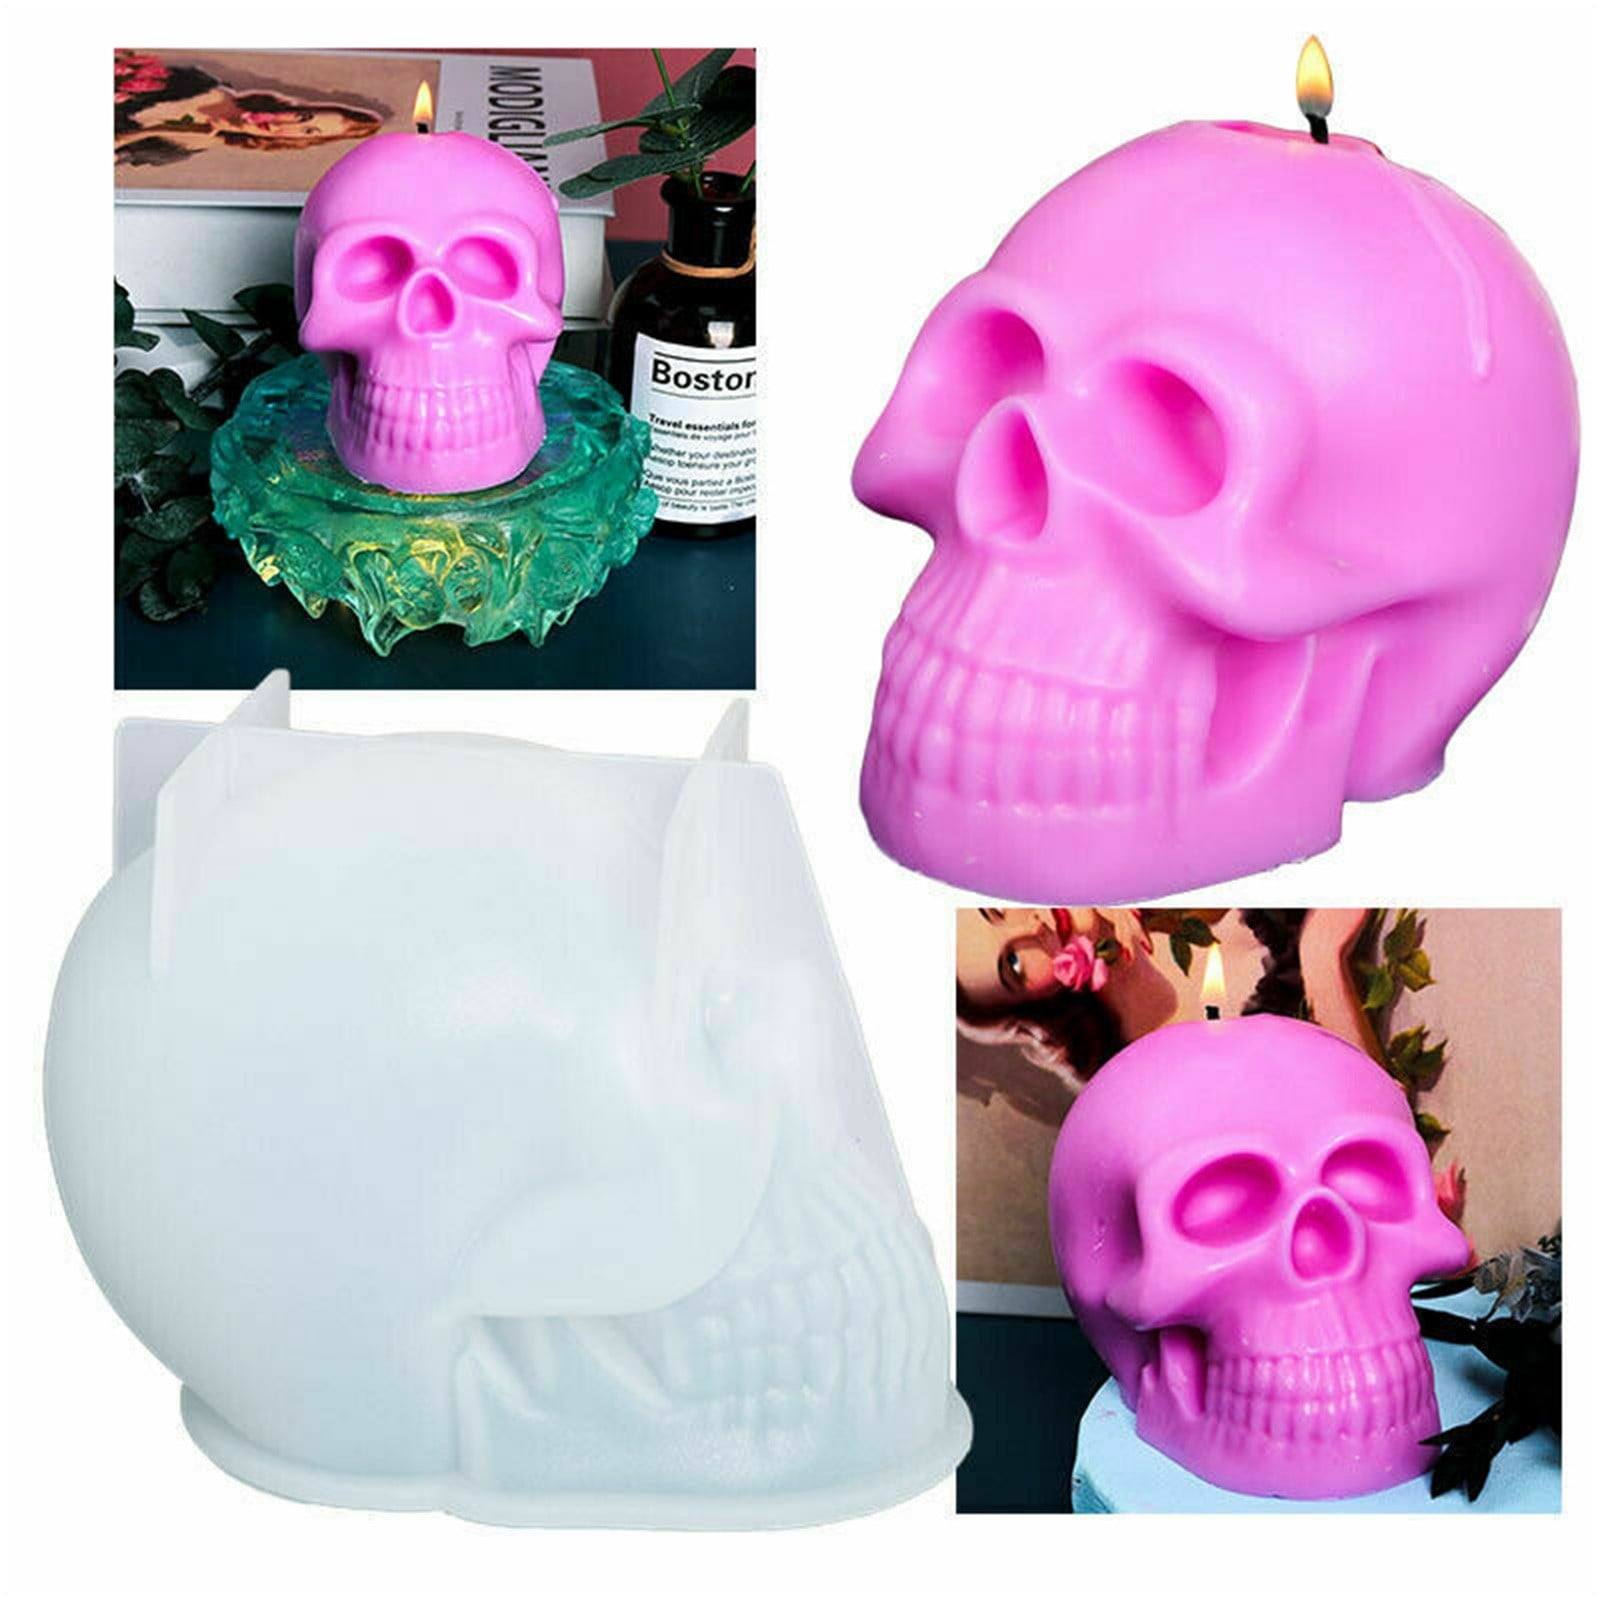 Silicone Mold - Skull 3D - for Making Soaps, Candles and Figurines